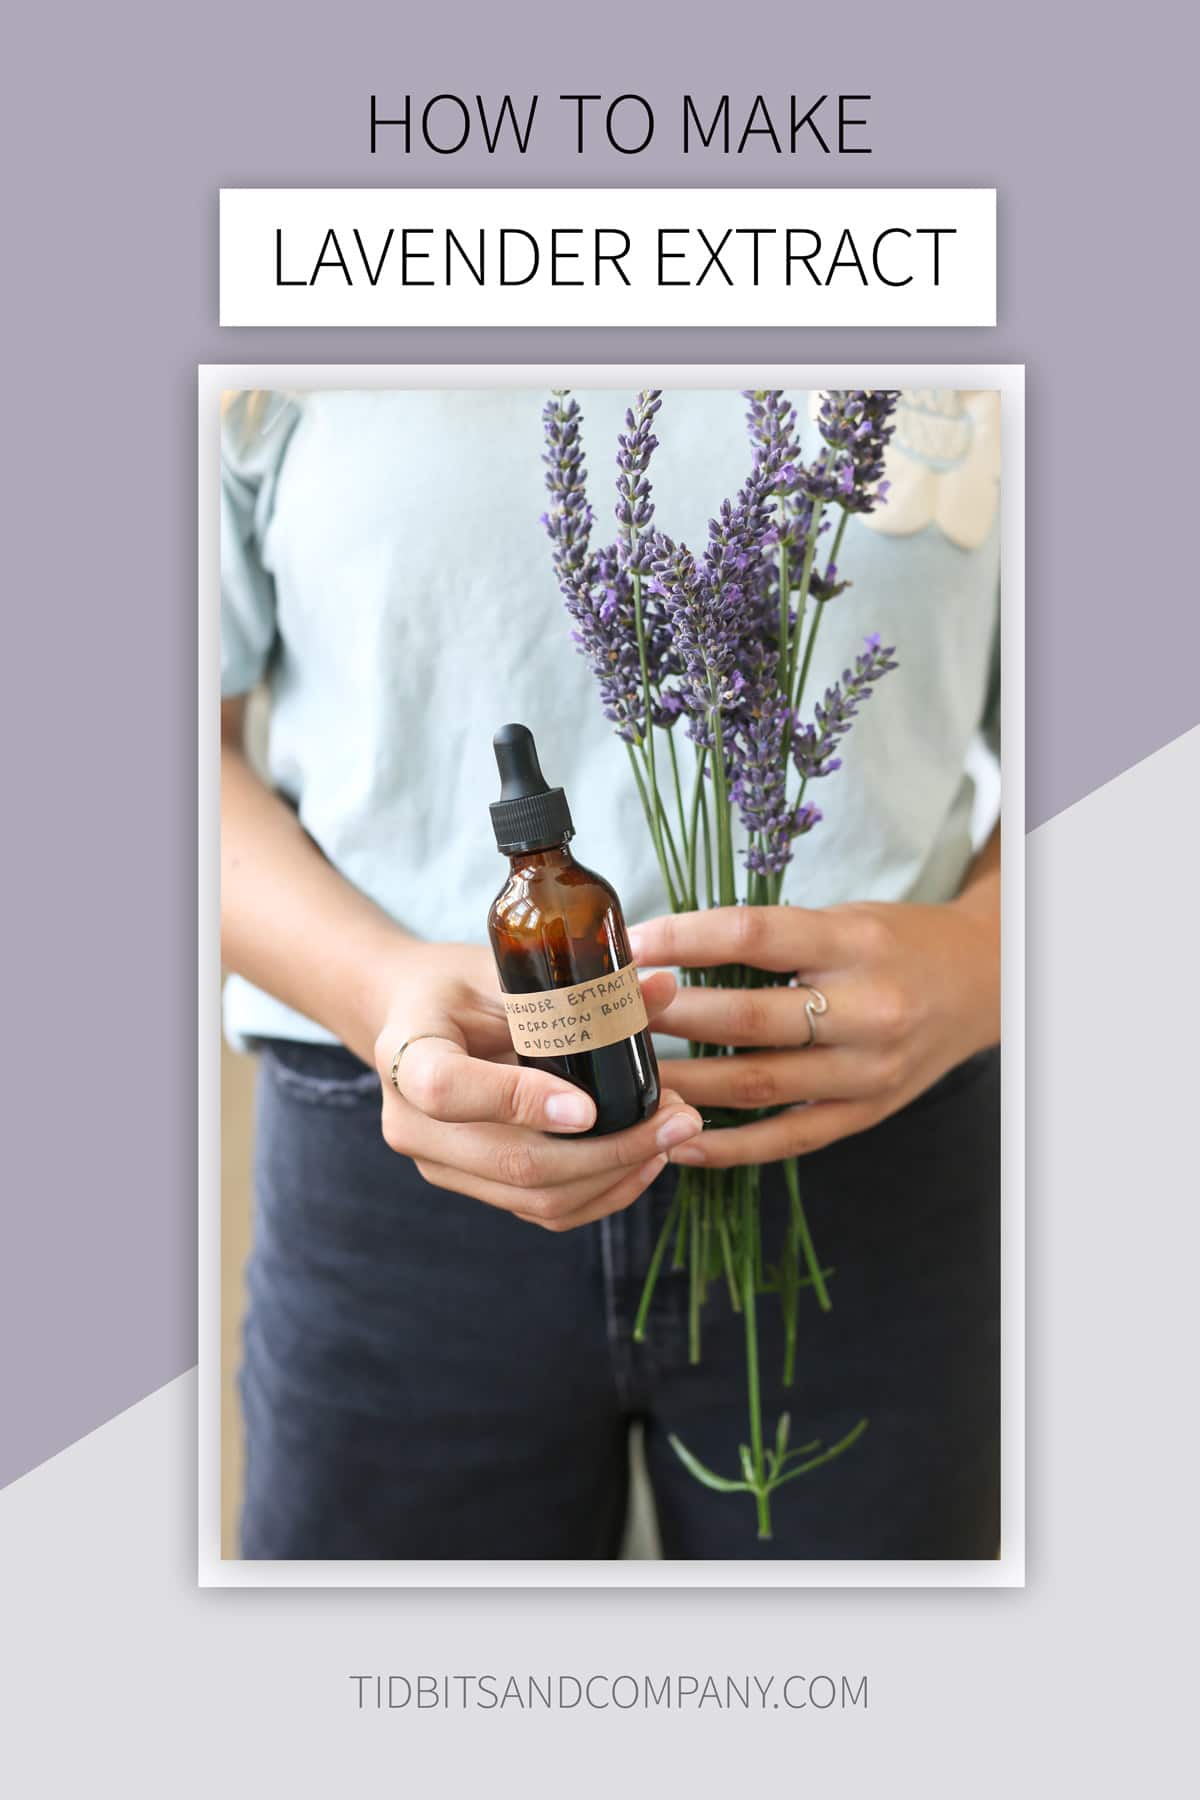 Text of "how to make lavender extract" and a woman holding a brown glass bottle